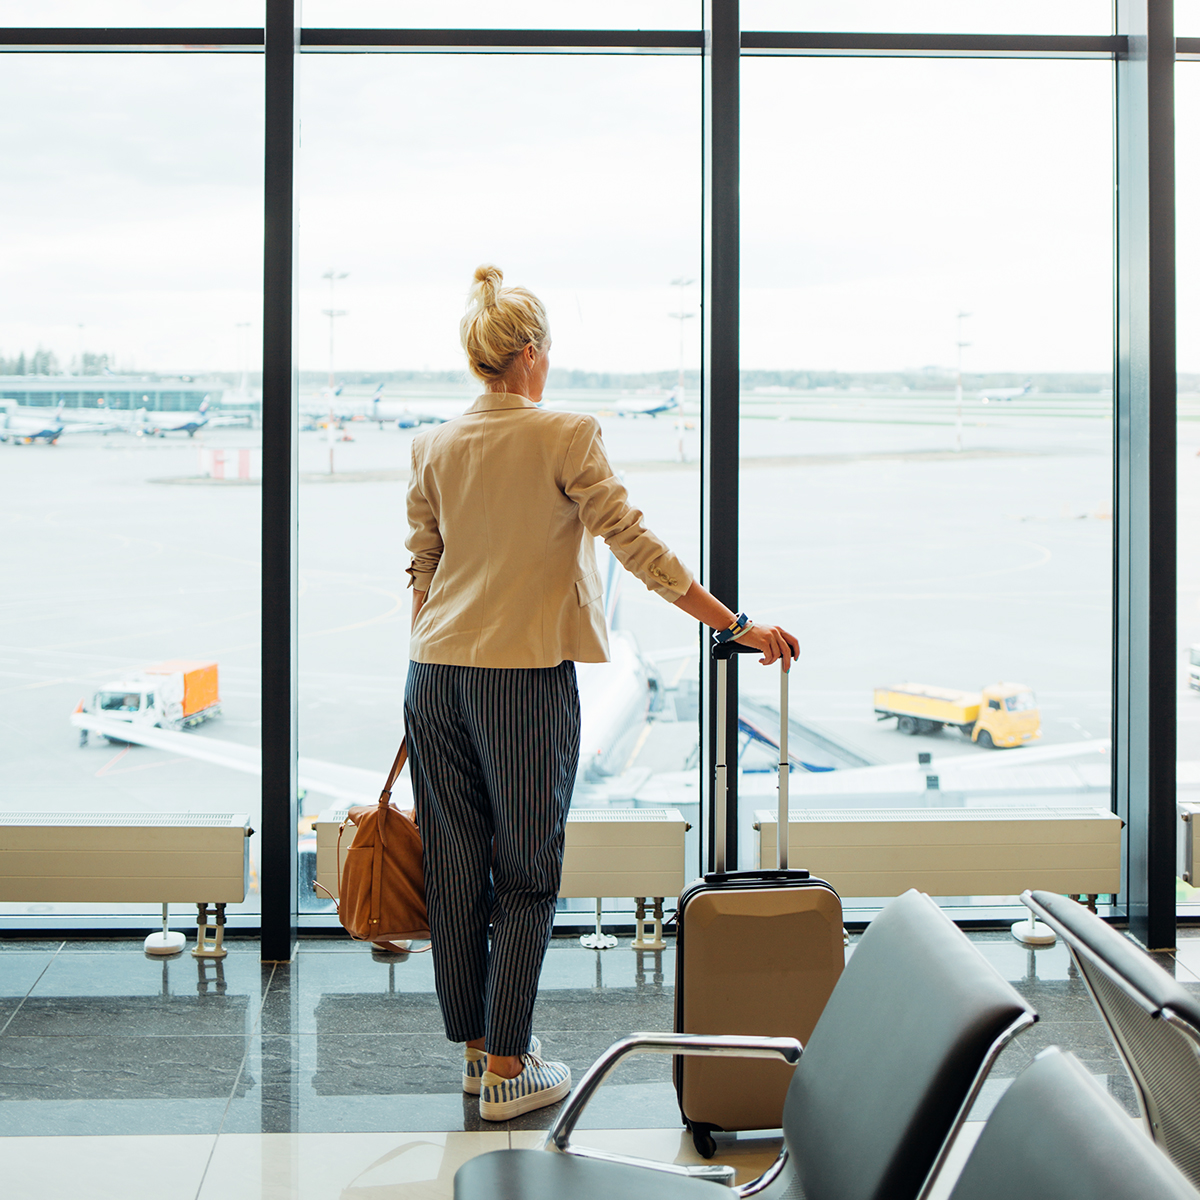 Some Airlines Are Embracing Wellness Initiatives